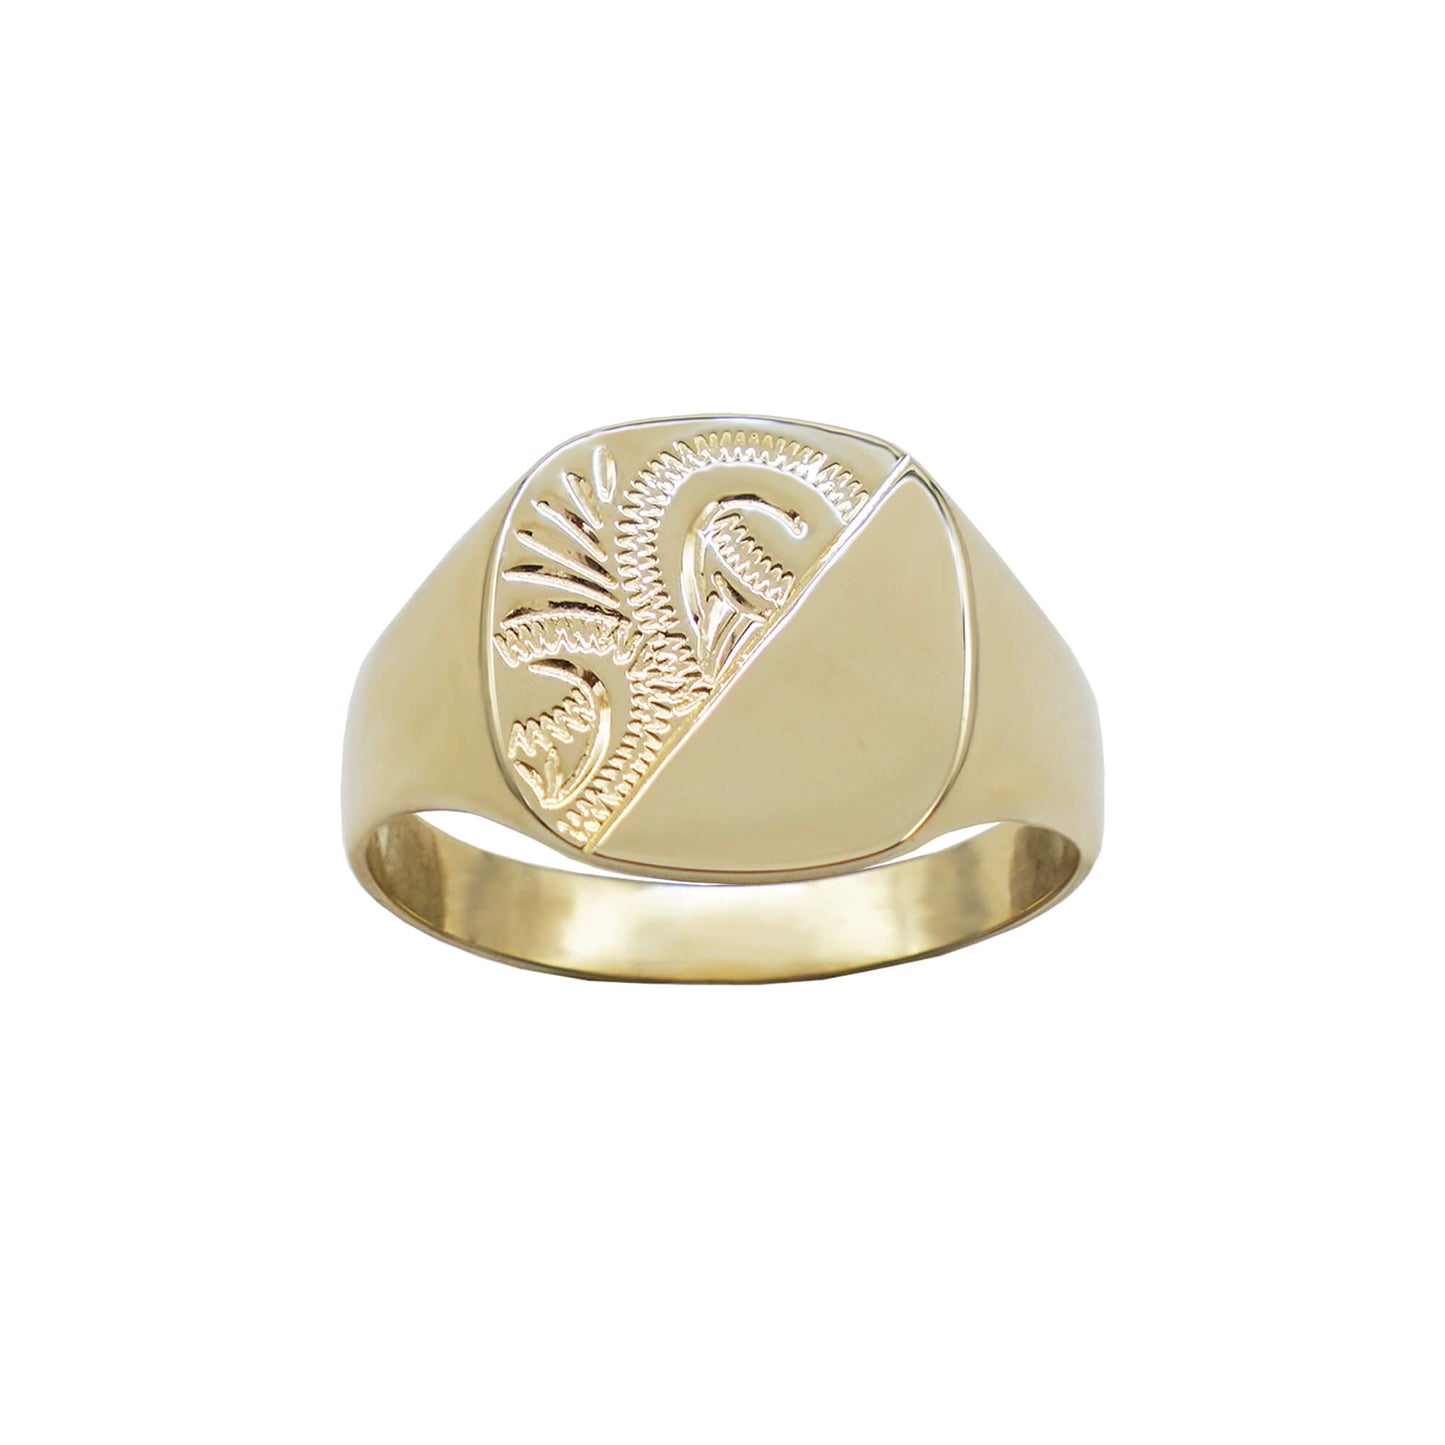 9k gold square cushion signet ring- with half diagonal swirl pattern on face.